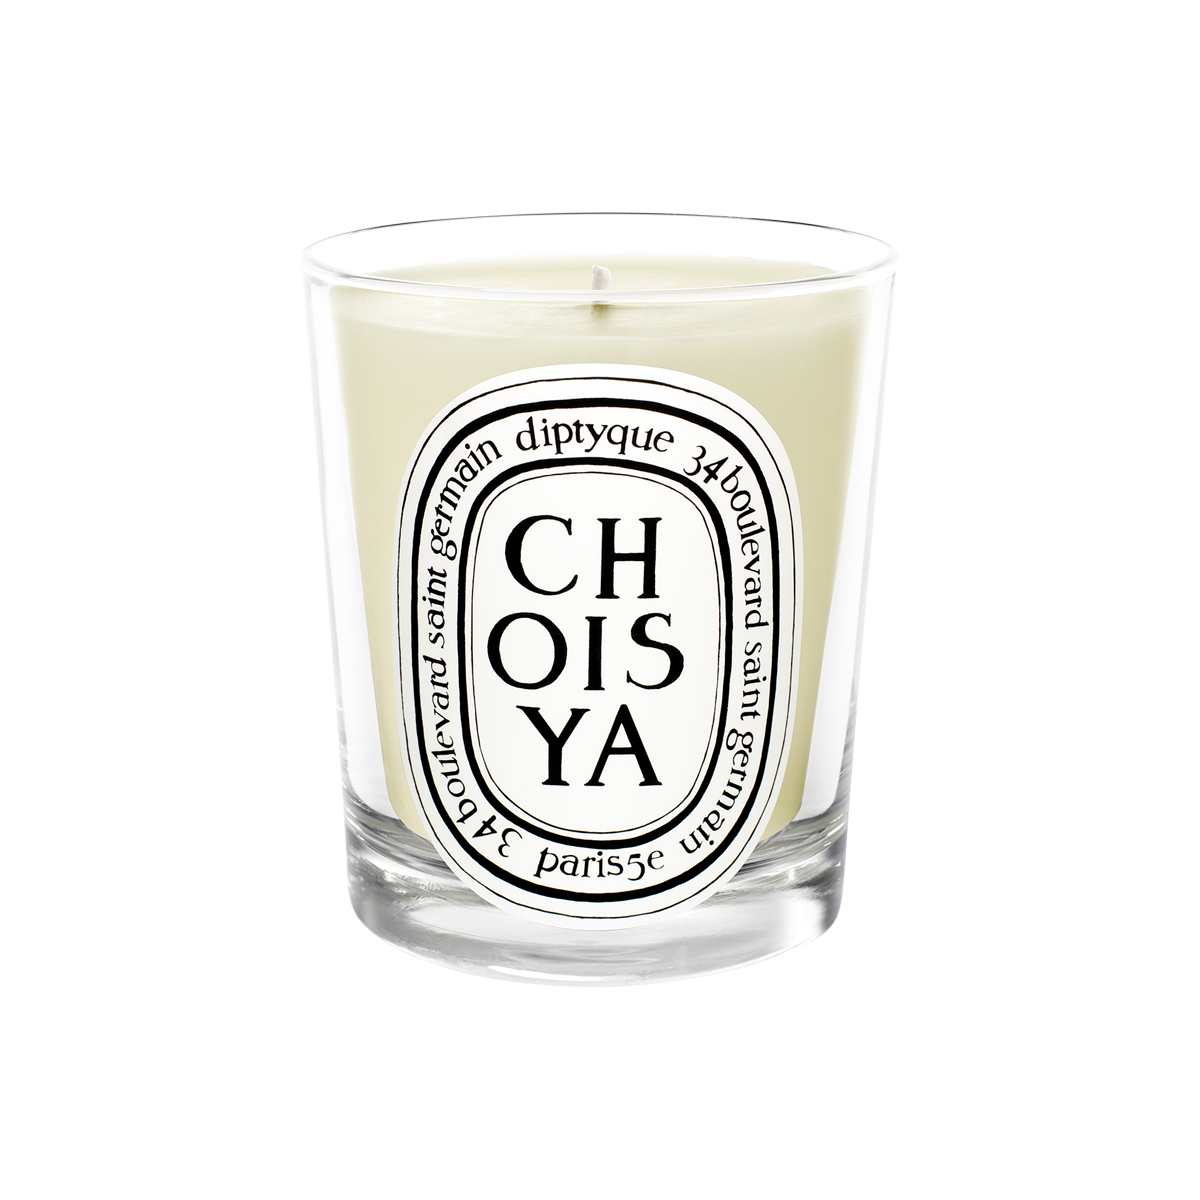 Diptyque - Choisya Scented Candle